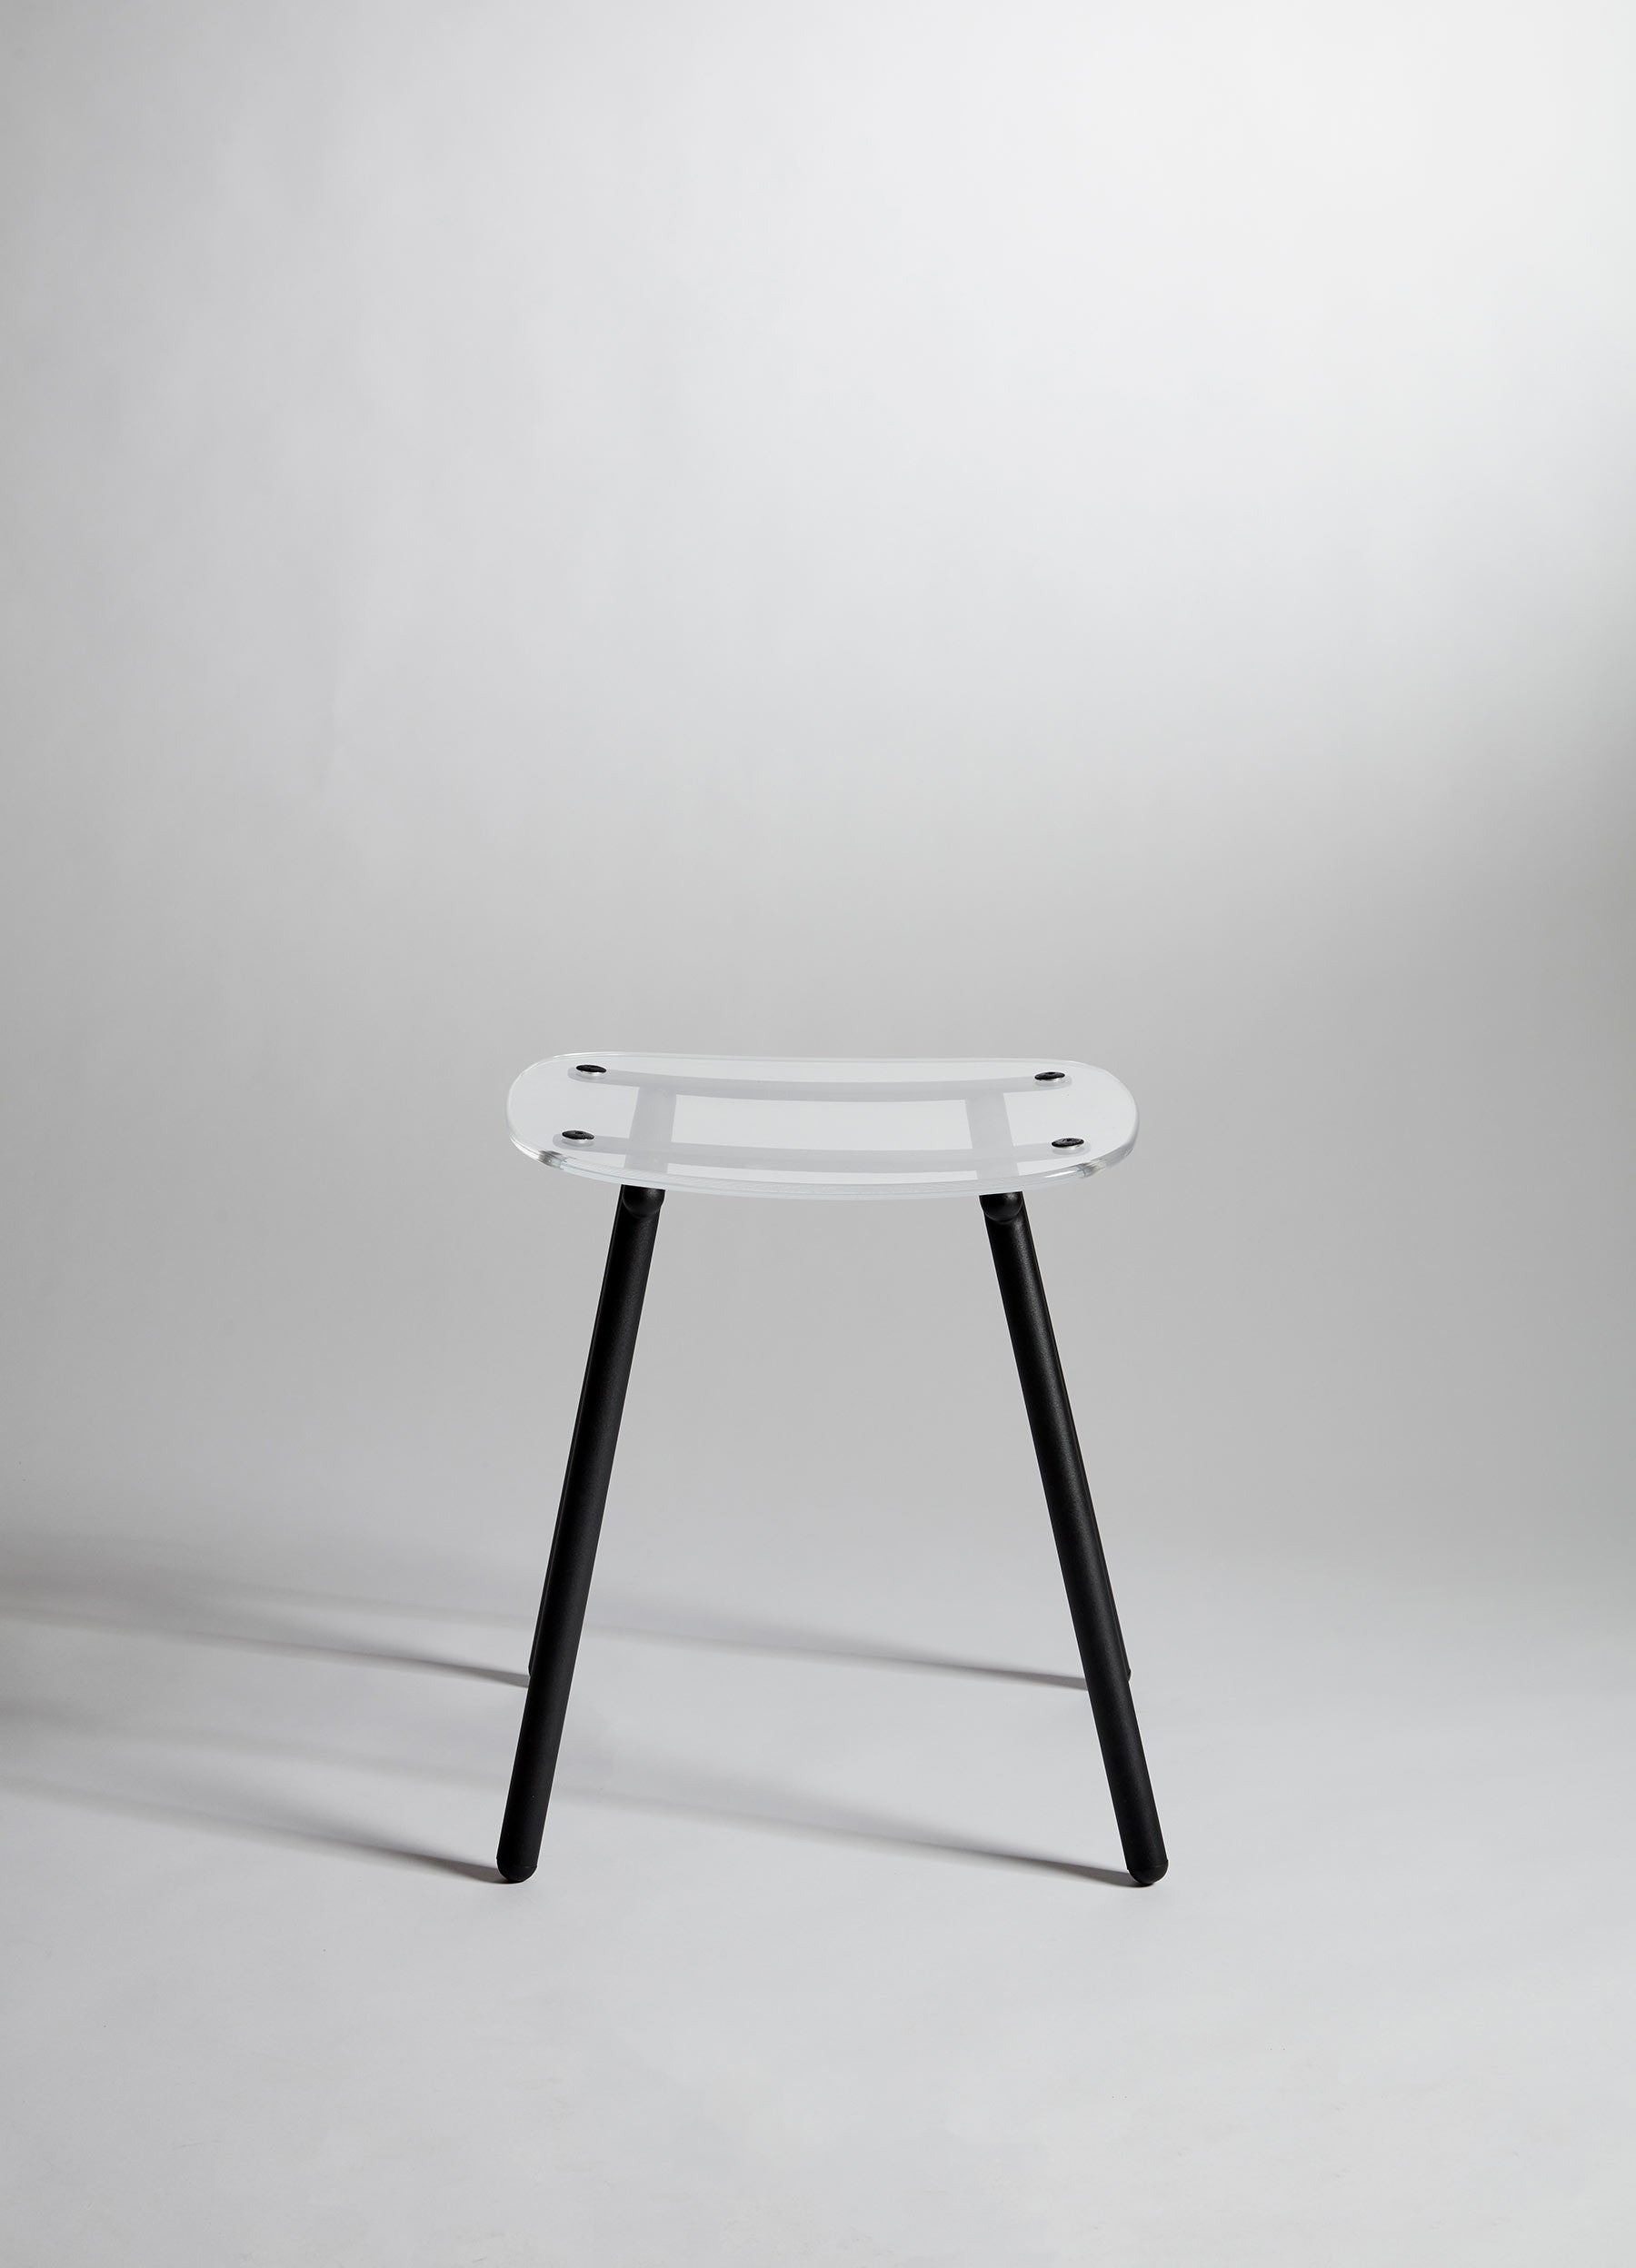 Fenster Low Stool | Clear Acrylic & Black Stainless Steel Indoor Outdoor Seating | GibsonKarlo | DesignByThem